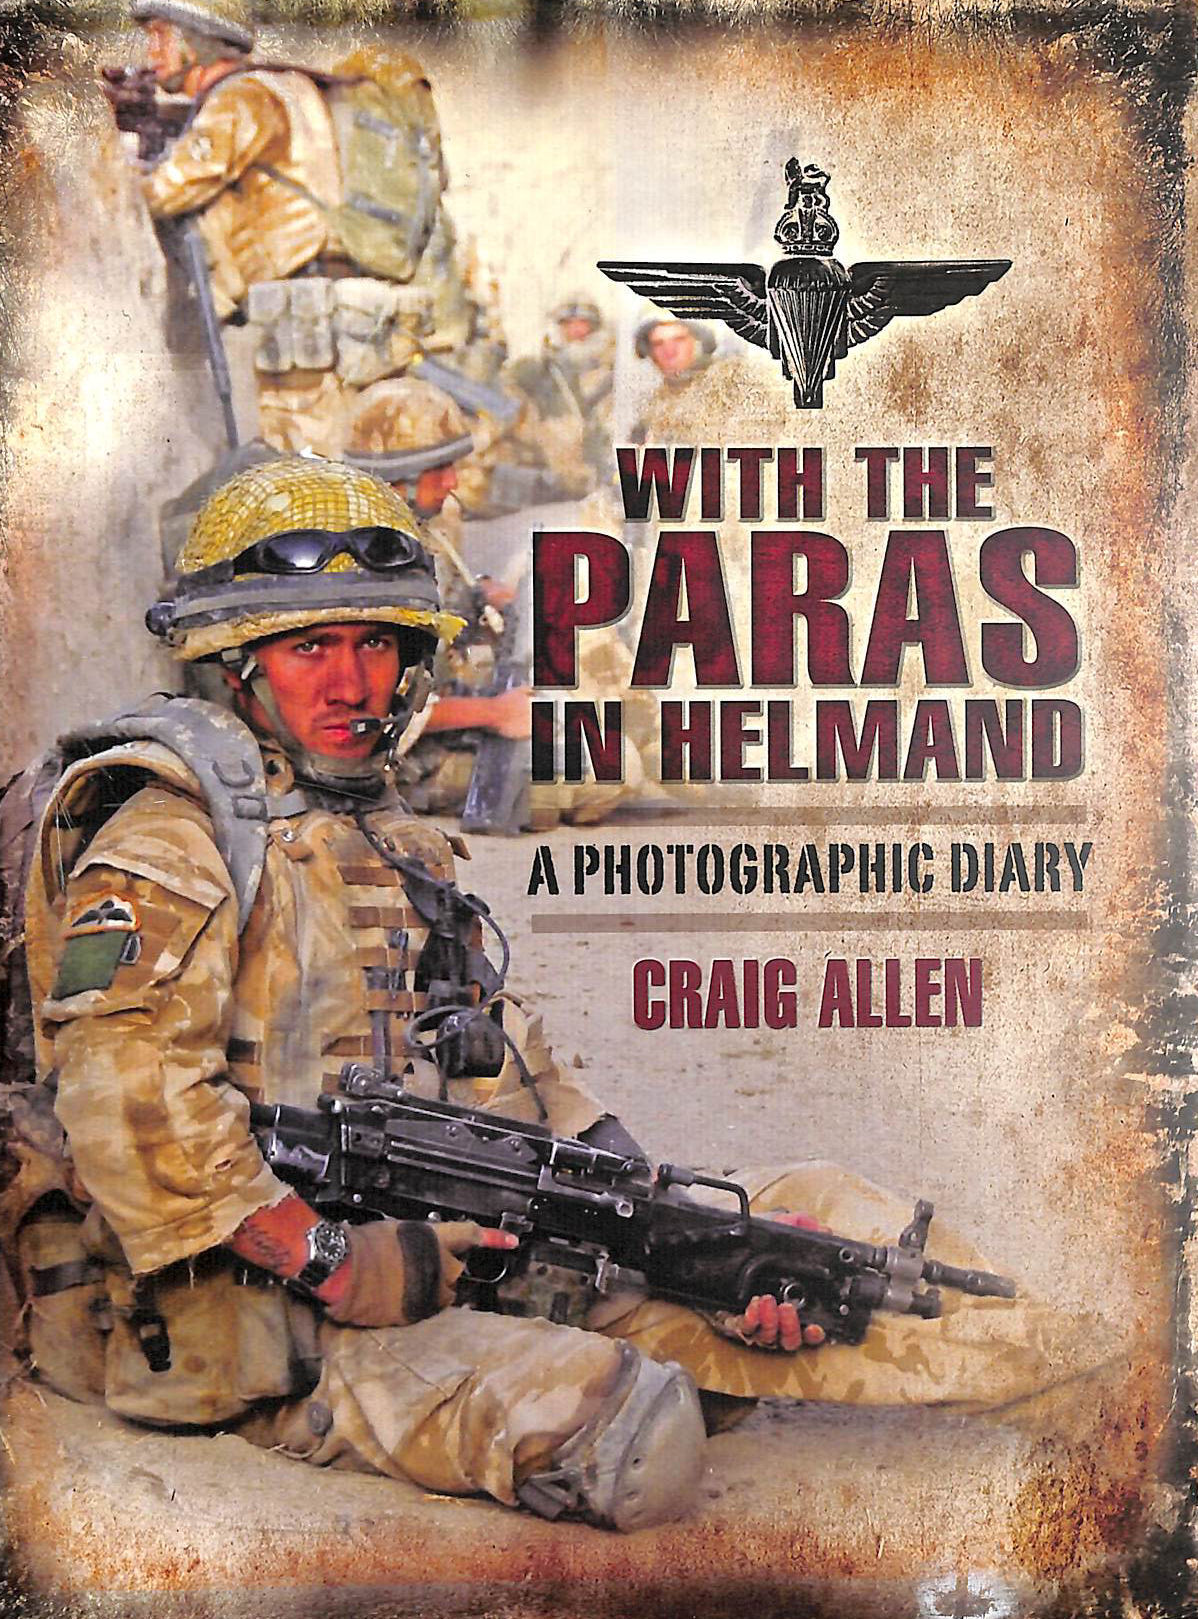 CRAIG ALLEN - With the Paras in Helmand: A Photographic Diary